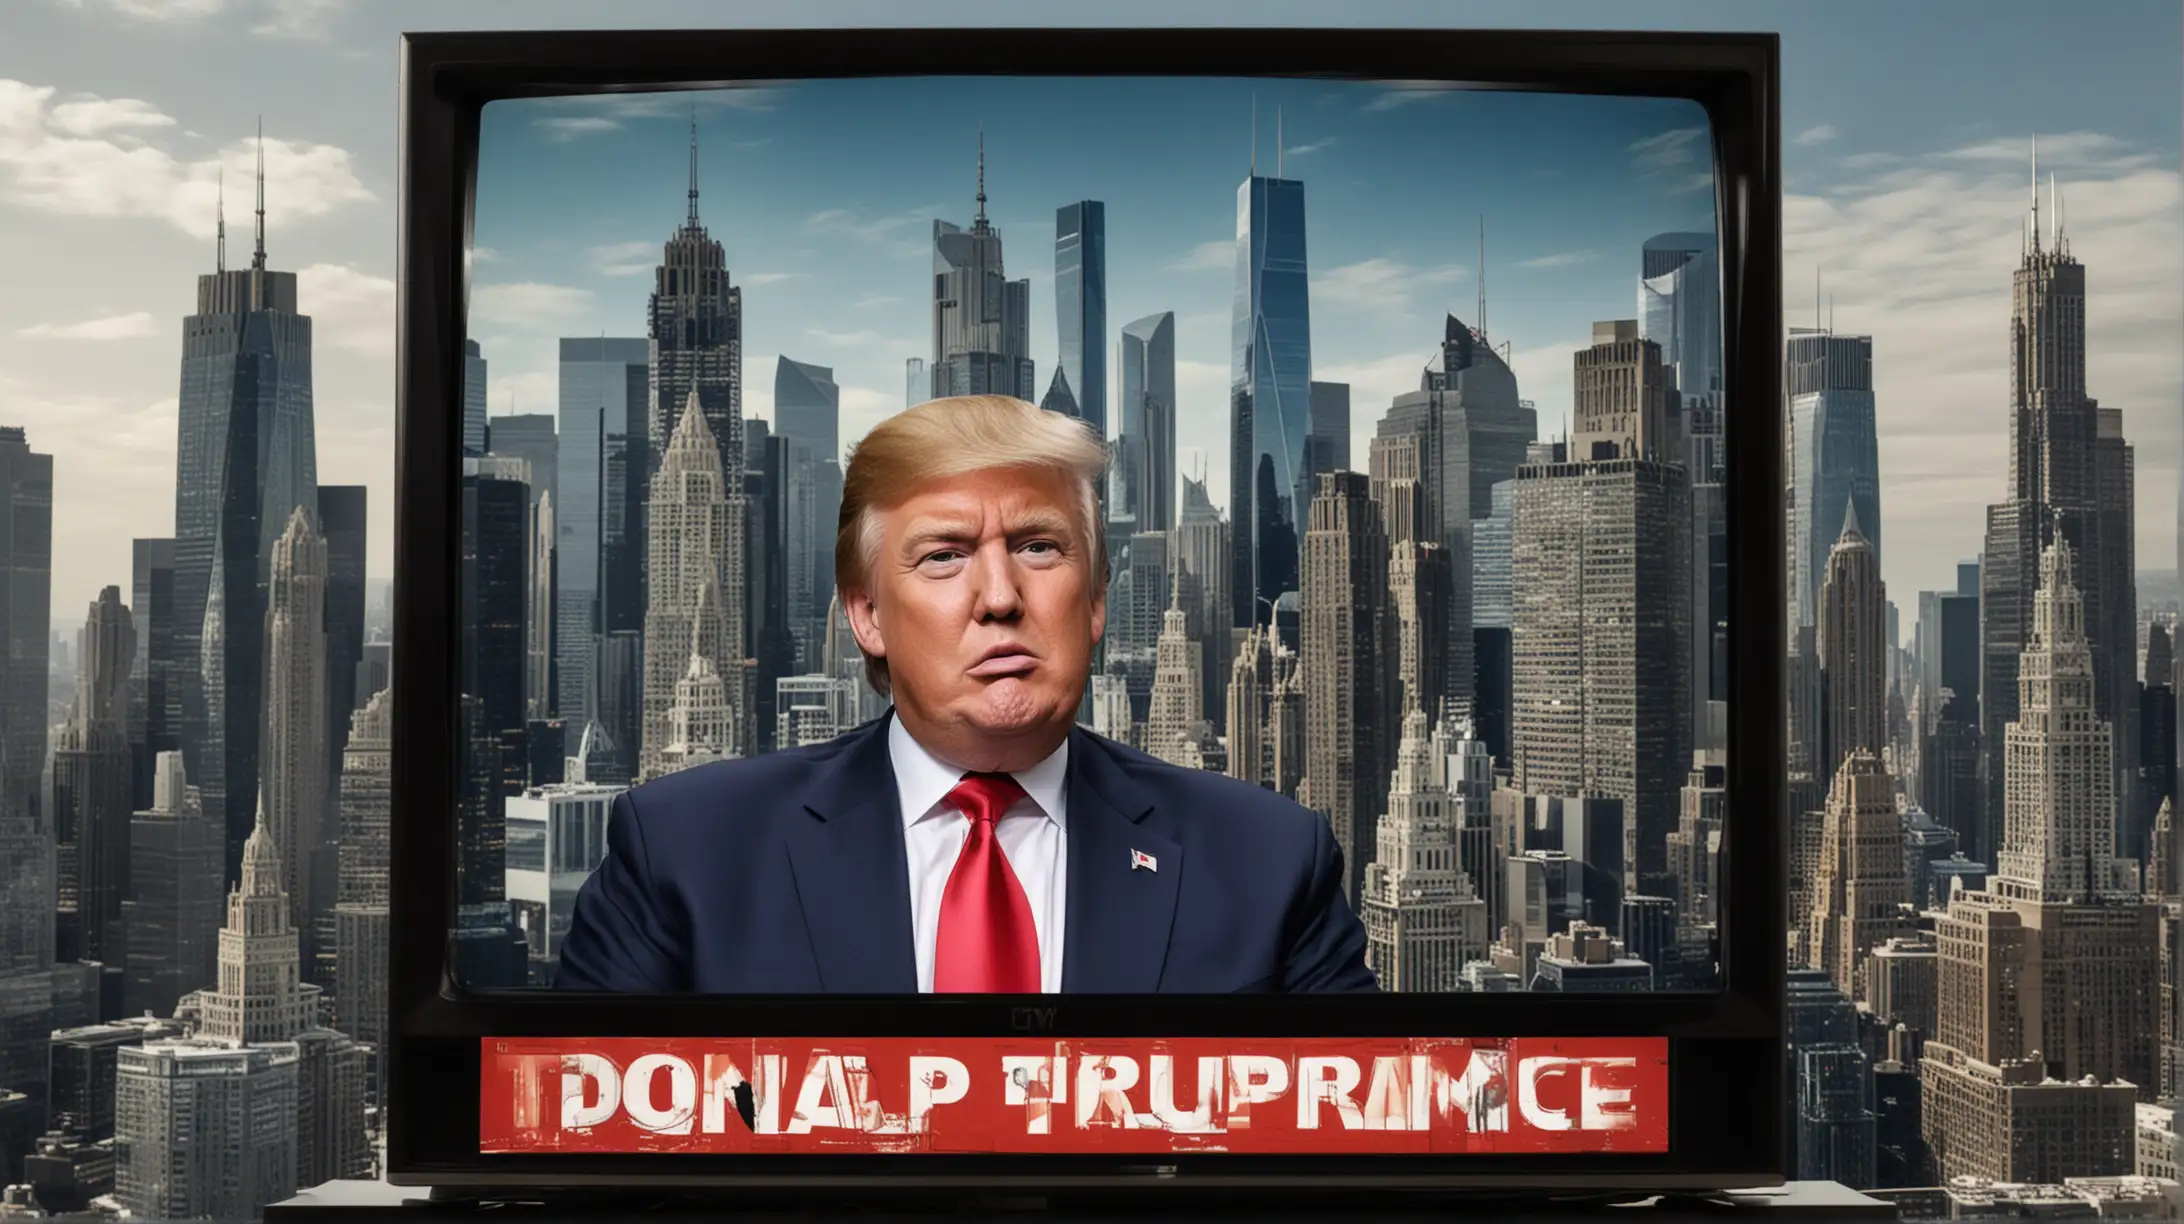 An image of Donald Trump on a television set, with visuals of skyscrapers bearing his name and scenes from "The Apprentice," symbolizing his background as a successful businessman and TV personality known for his controversial and direct style.